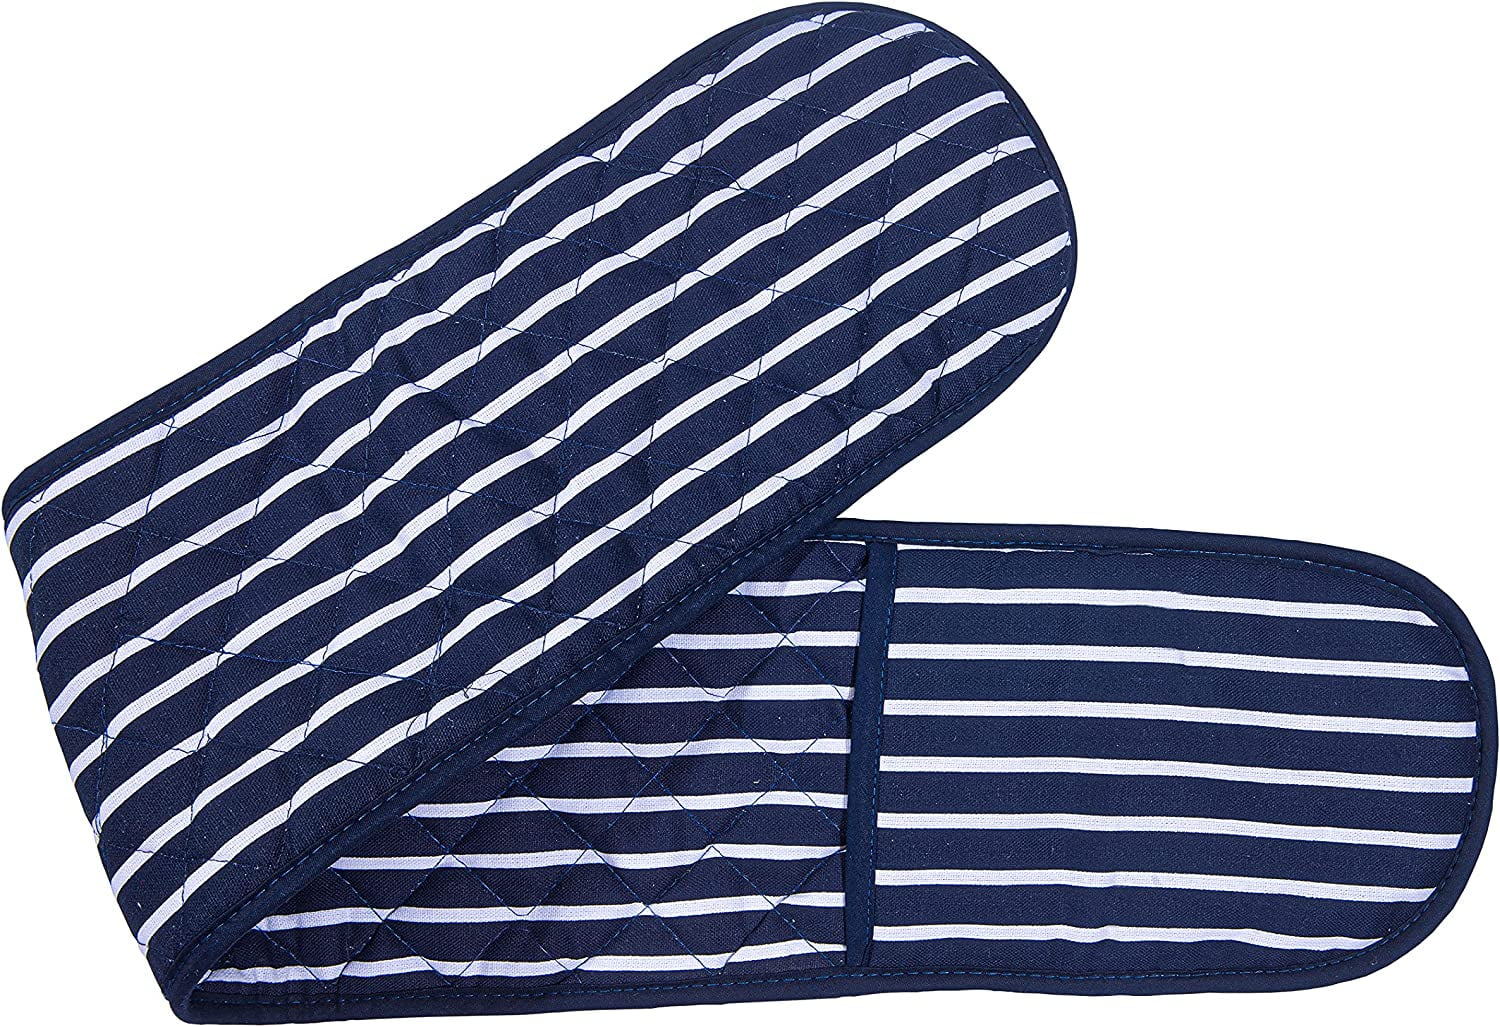 ZIMEL HOMES Butcher Stripe Double Oven Gloves Mitts Blue/White Quilted Cooking Pot Holder Heat Resistant 